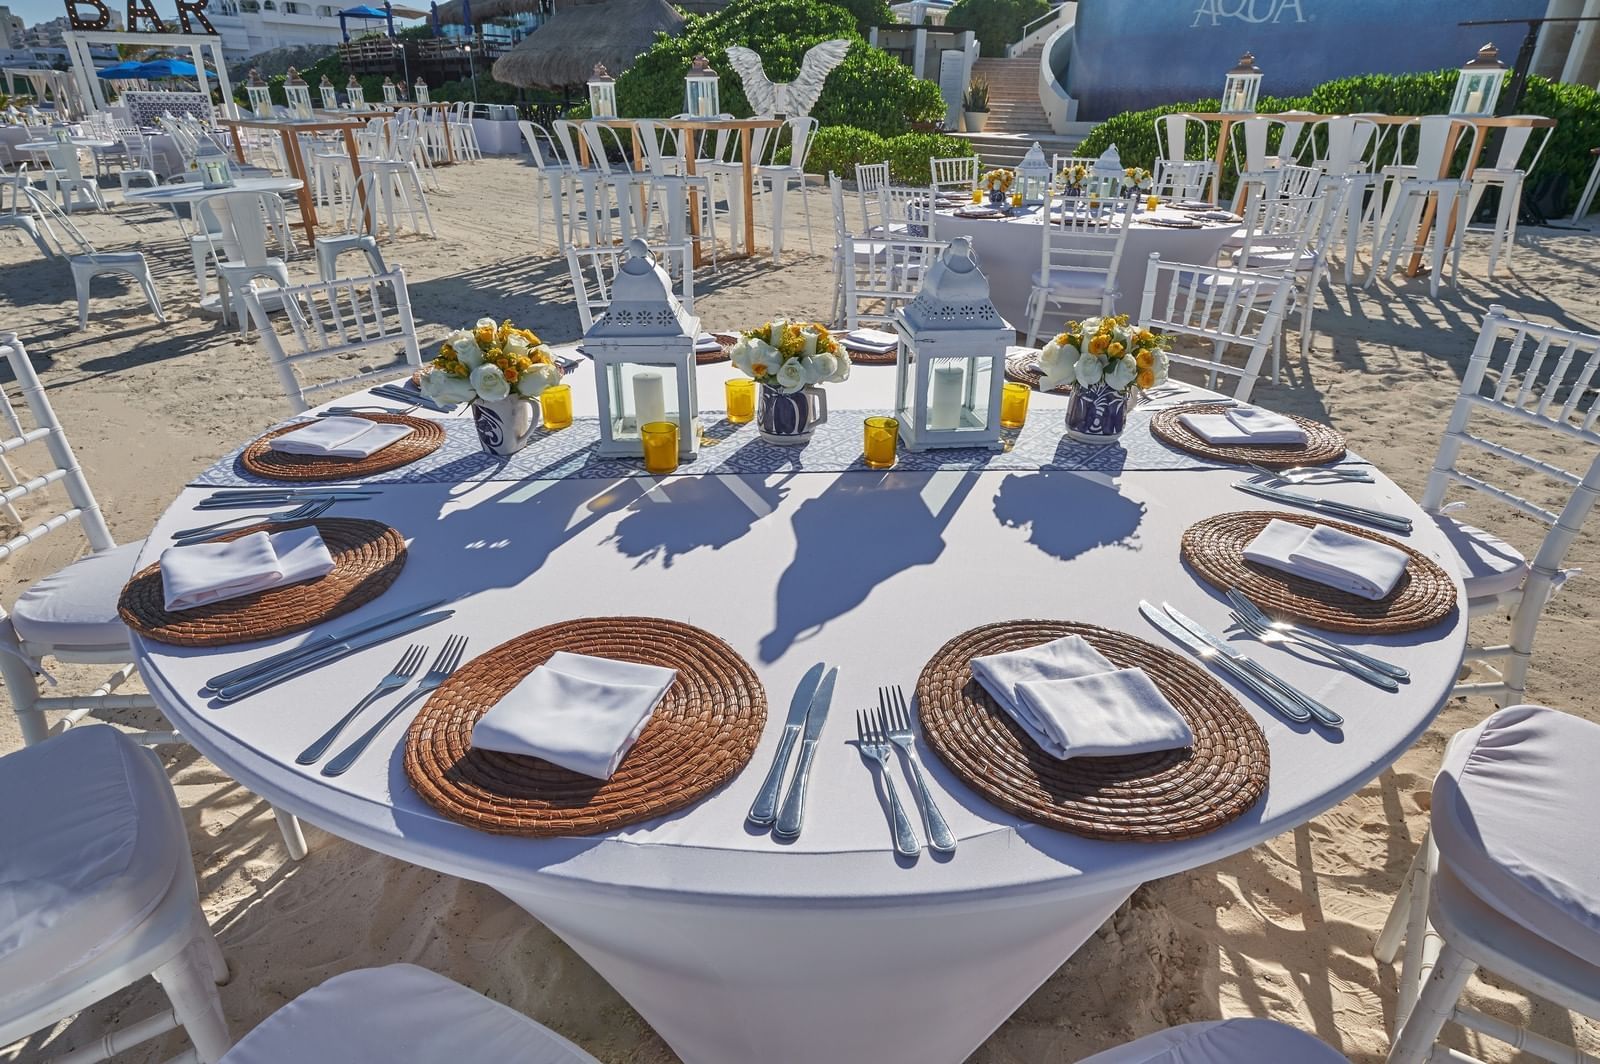 Outdoor dining area for events at Live Aqua Beach Resort Cancun